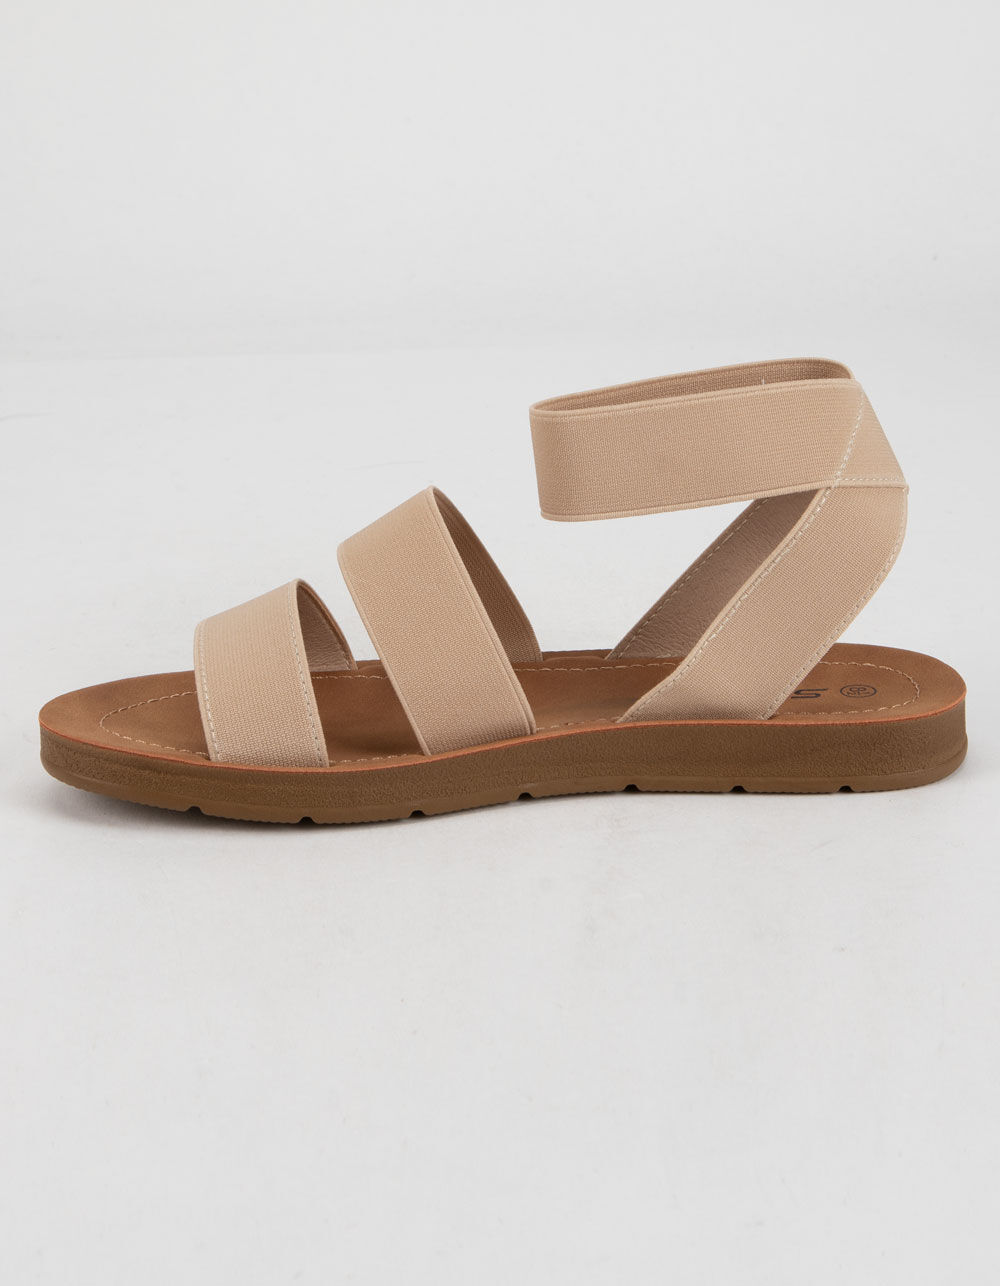 SODA Elastic Banded Ankle Strap Womens Nude Sandals - NUDE | Tillys